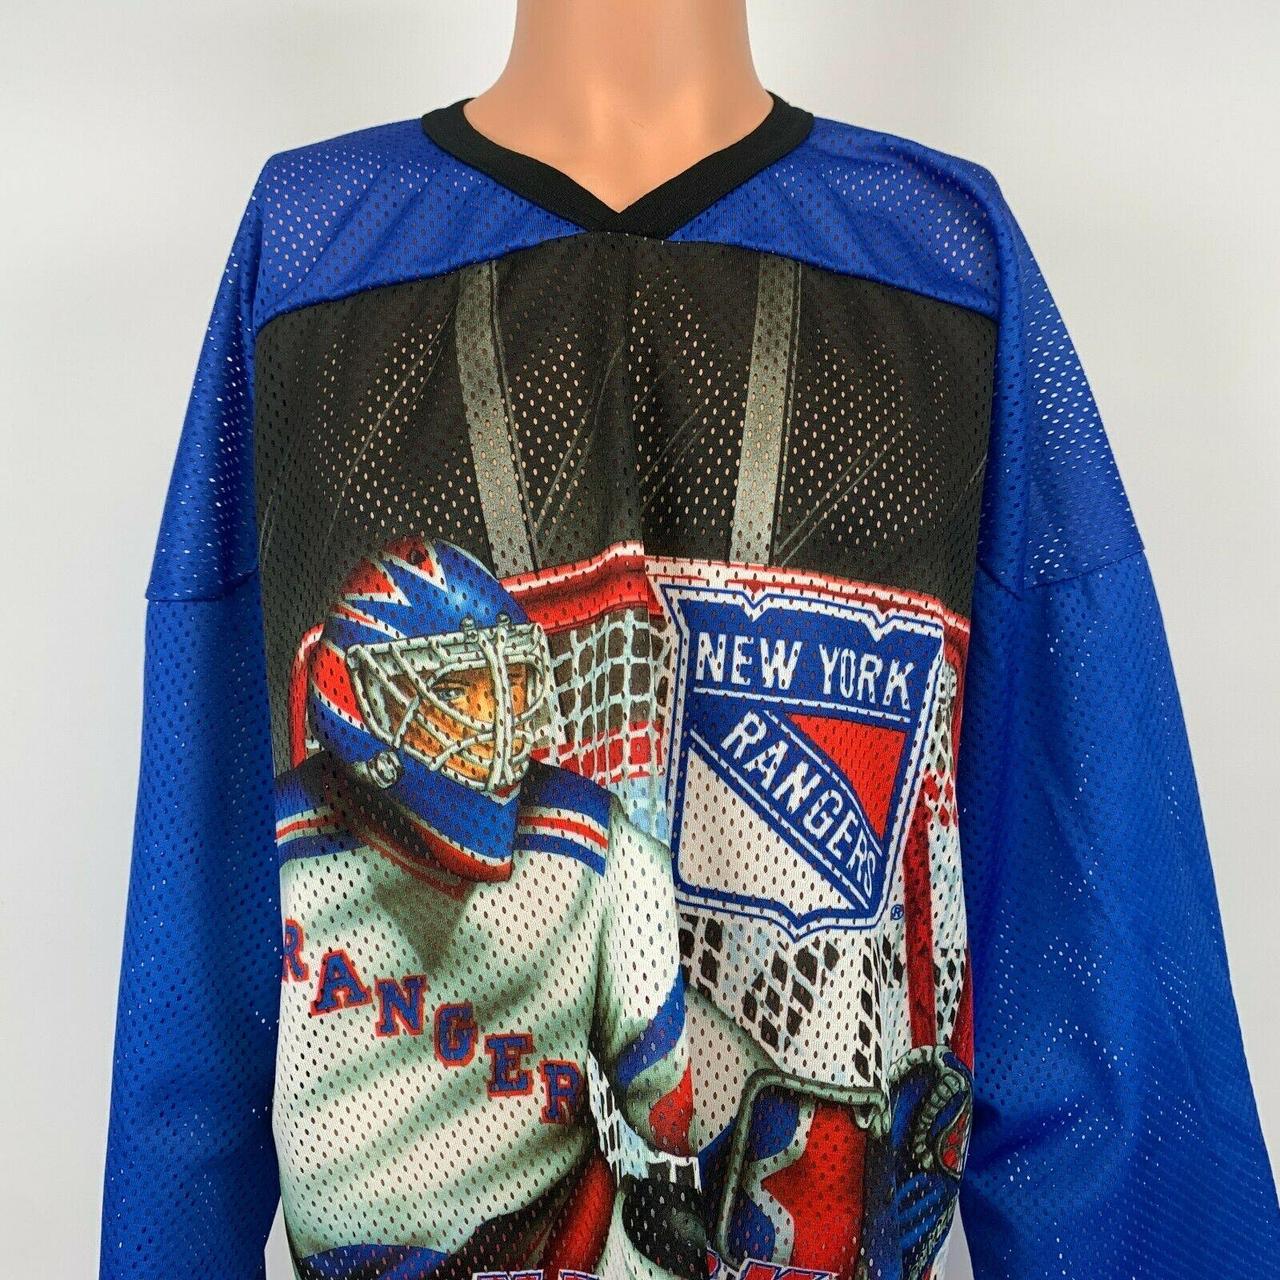 Mens New York Rangers Pro Hockey Outfit